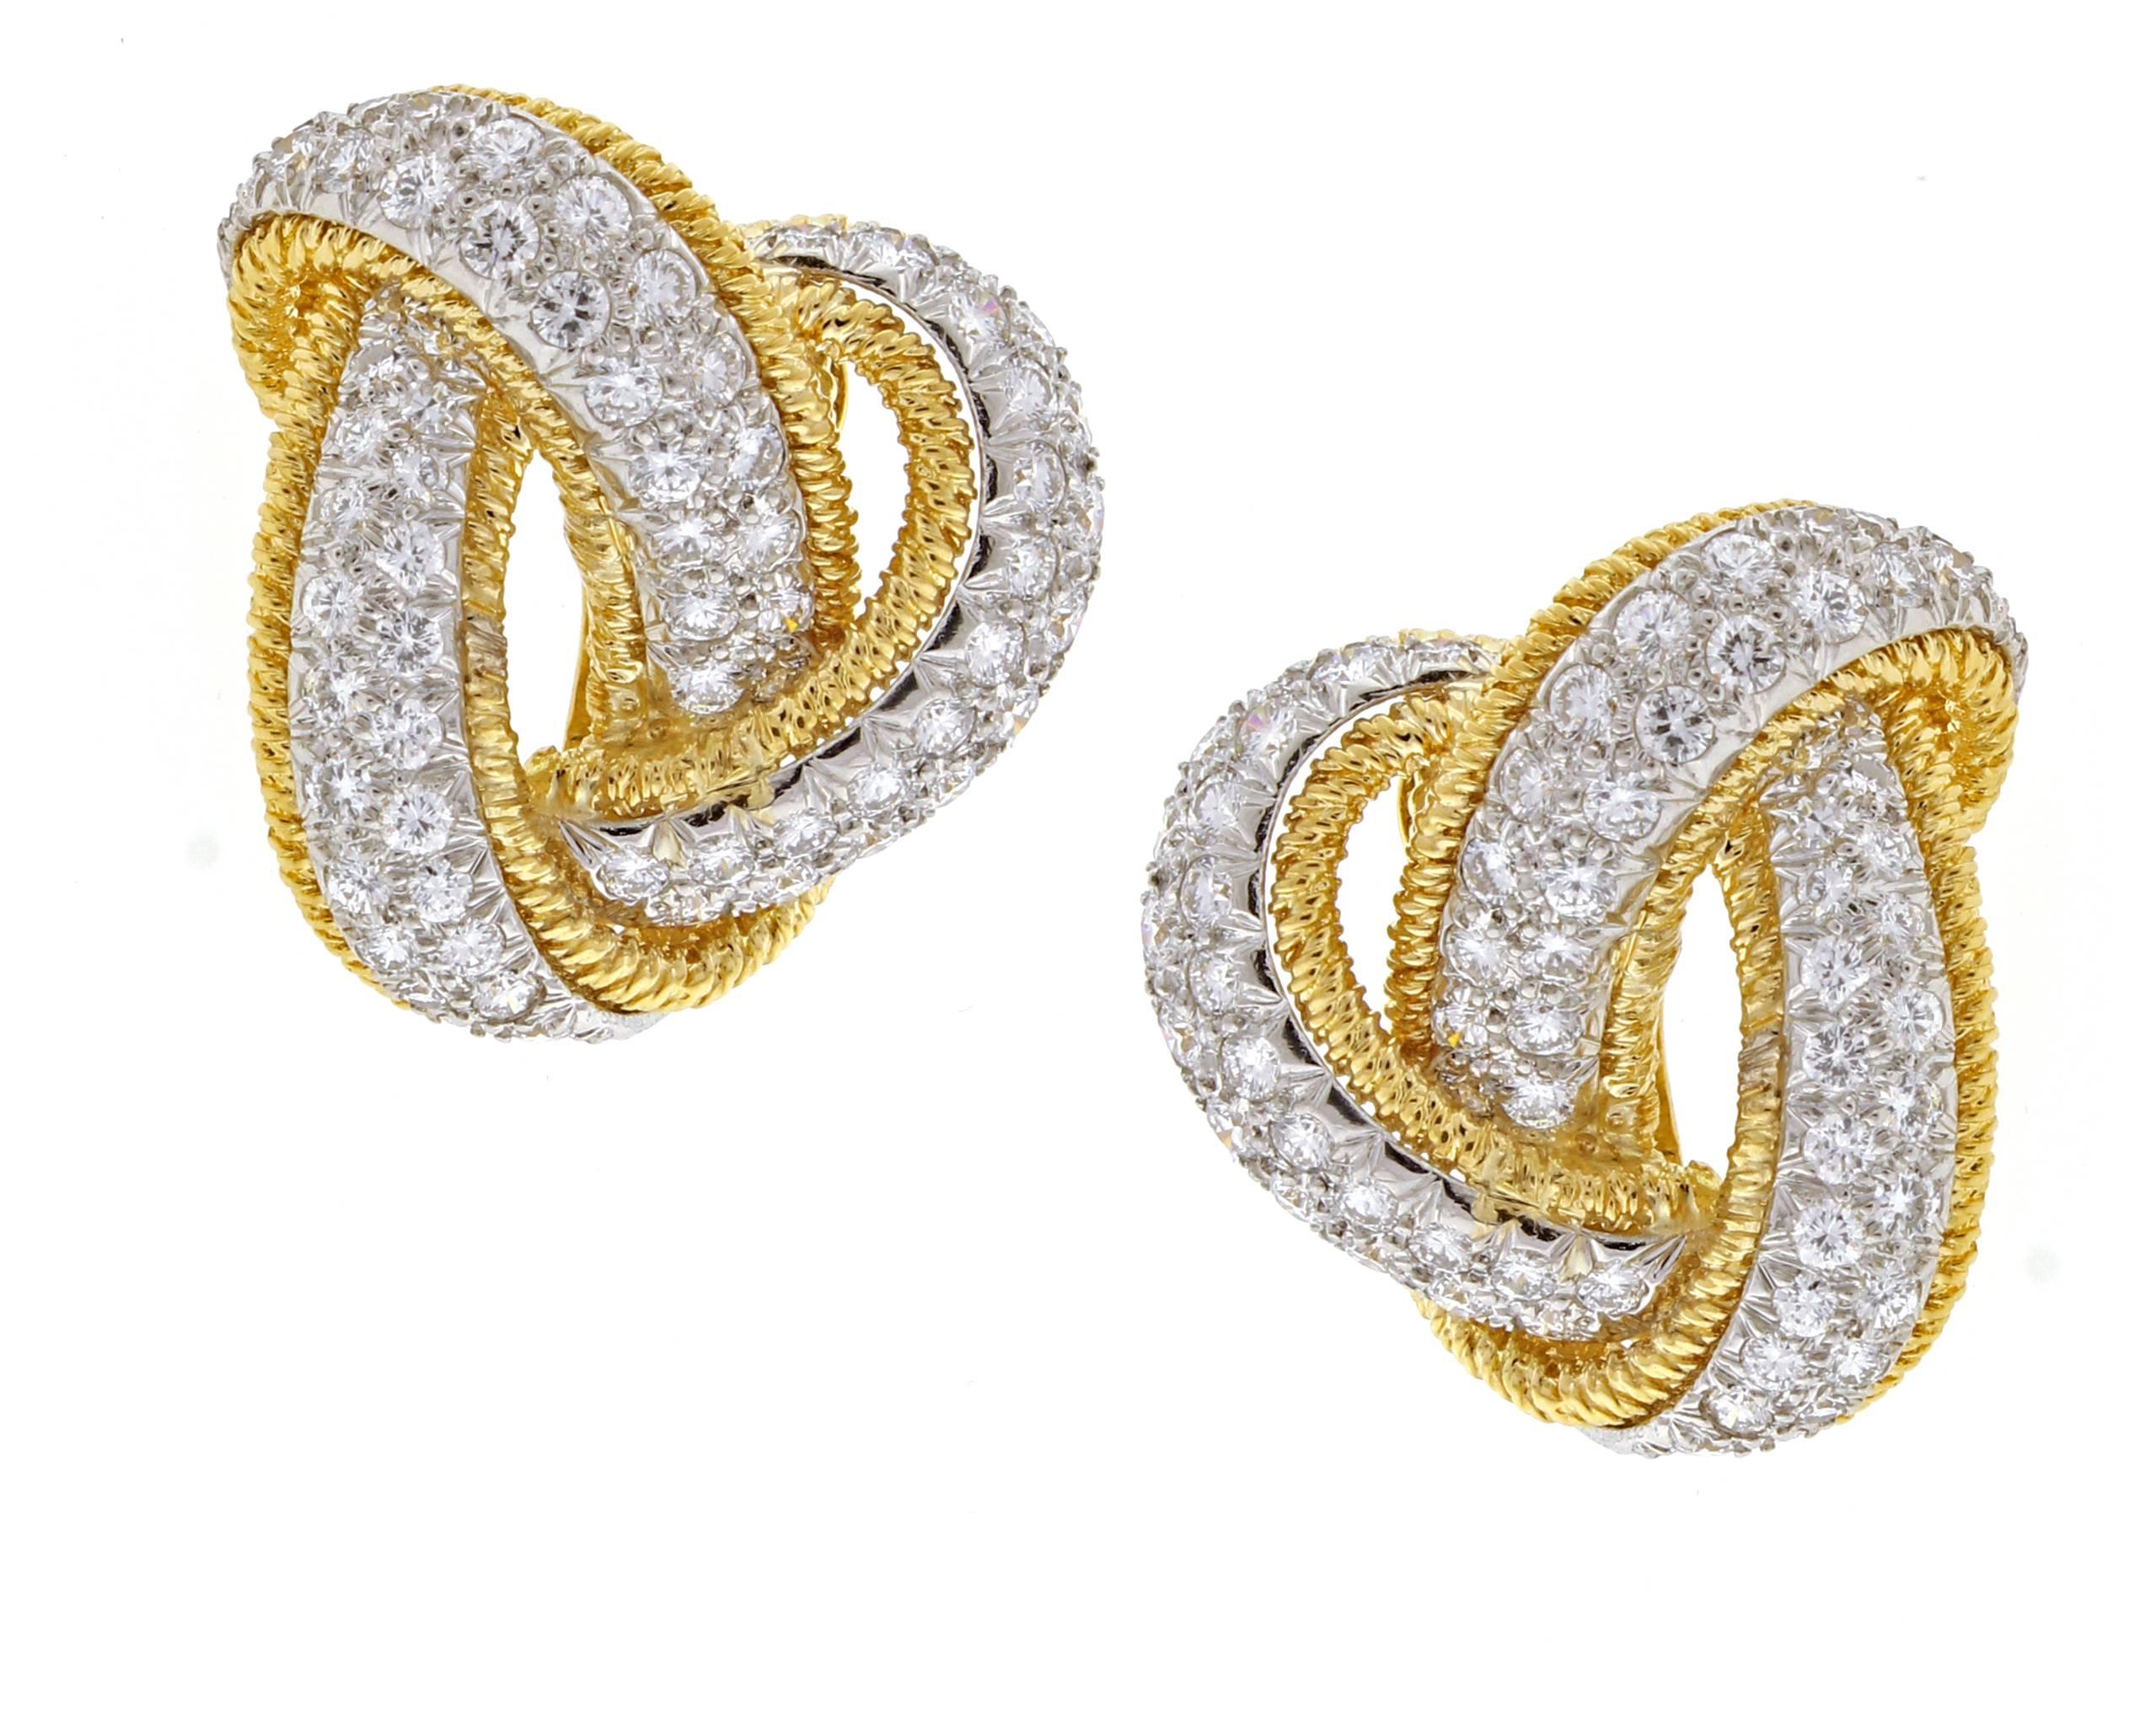 David Webb Diamond and Gold Knot Earrings In Excellent Condition For Sale In Bethesda, MD